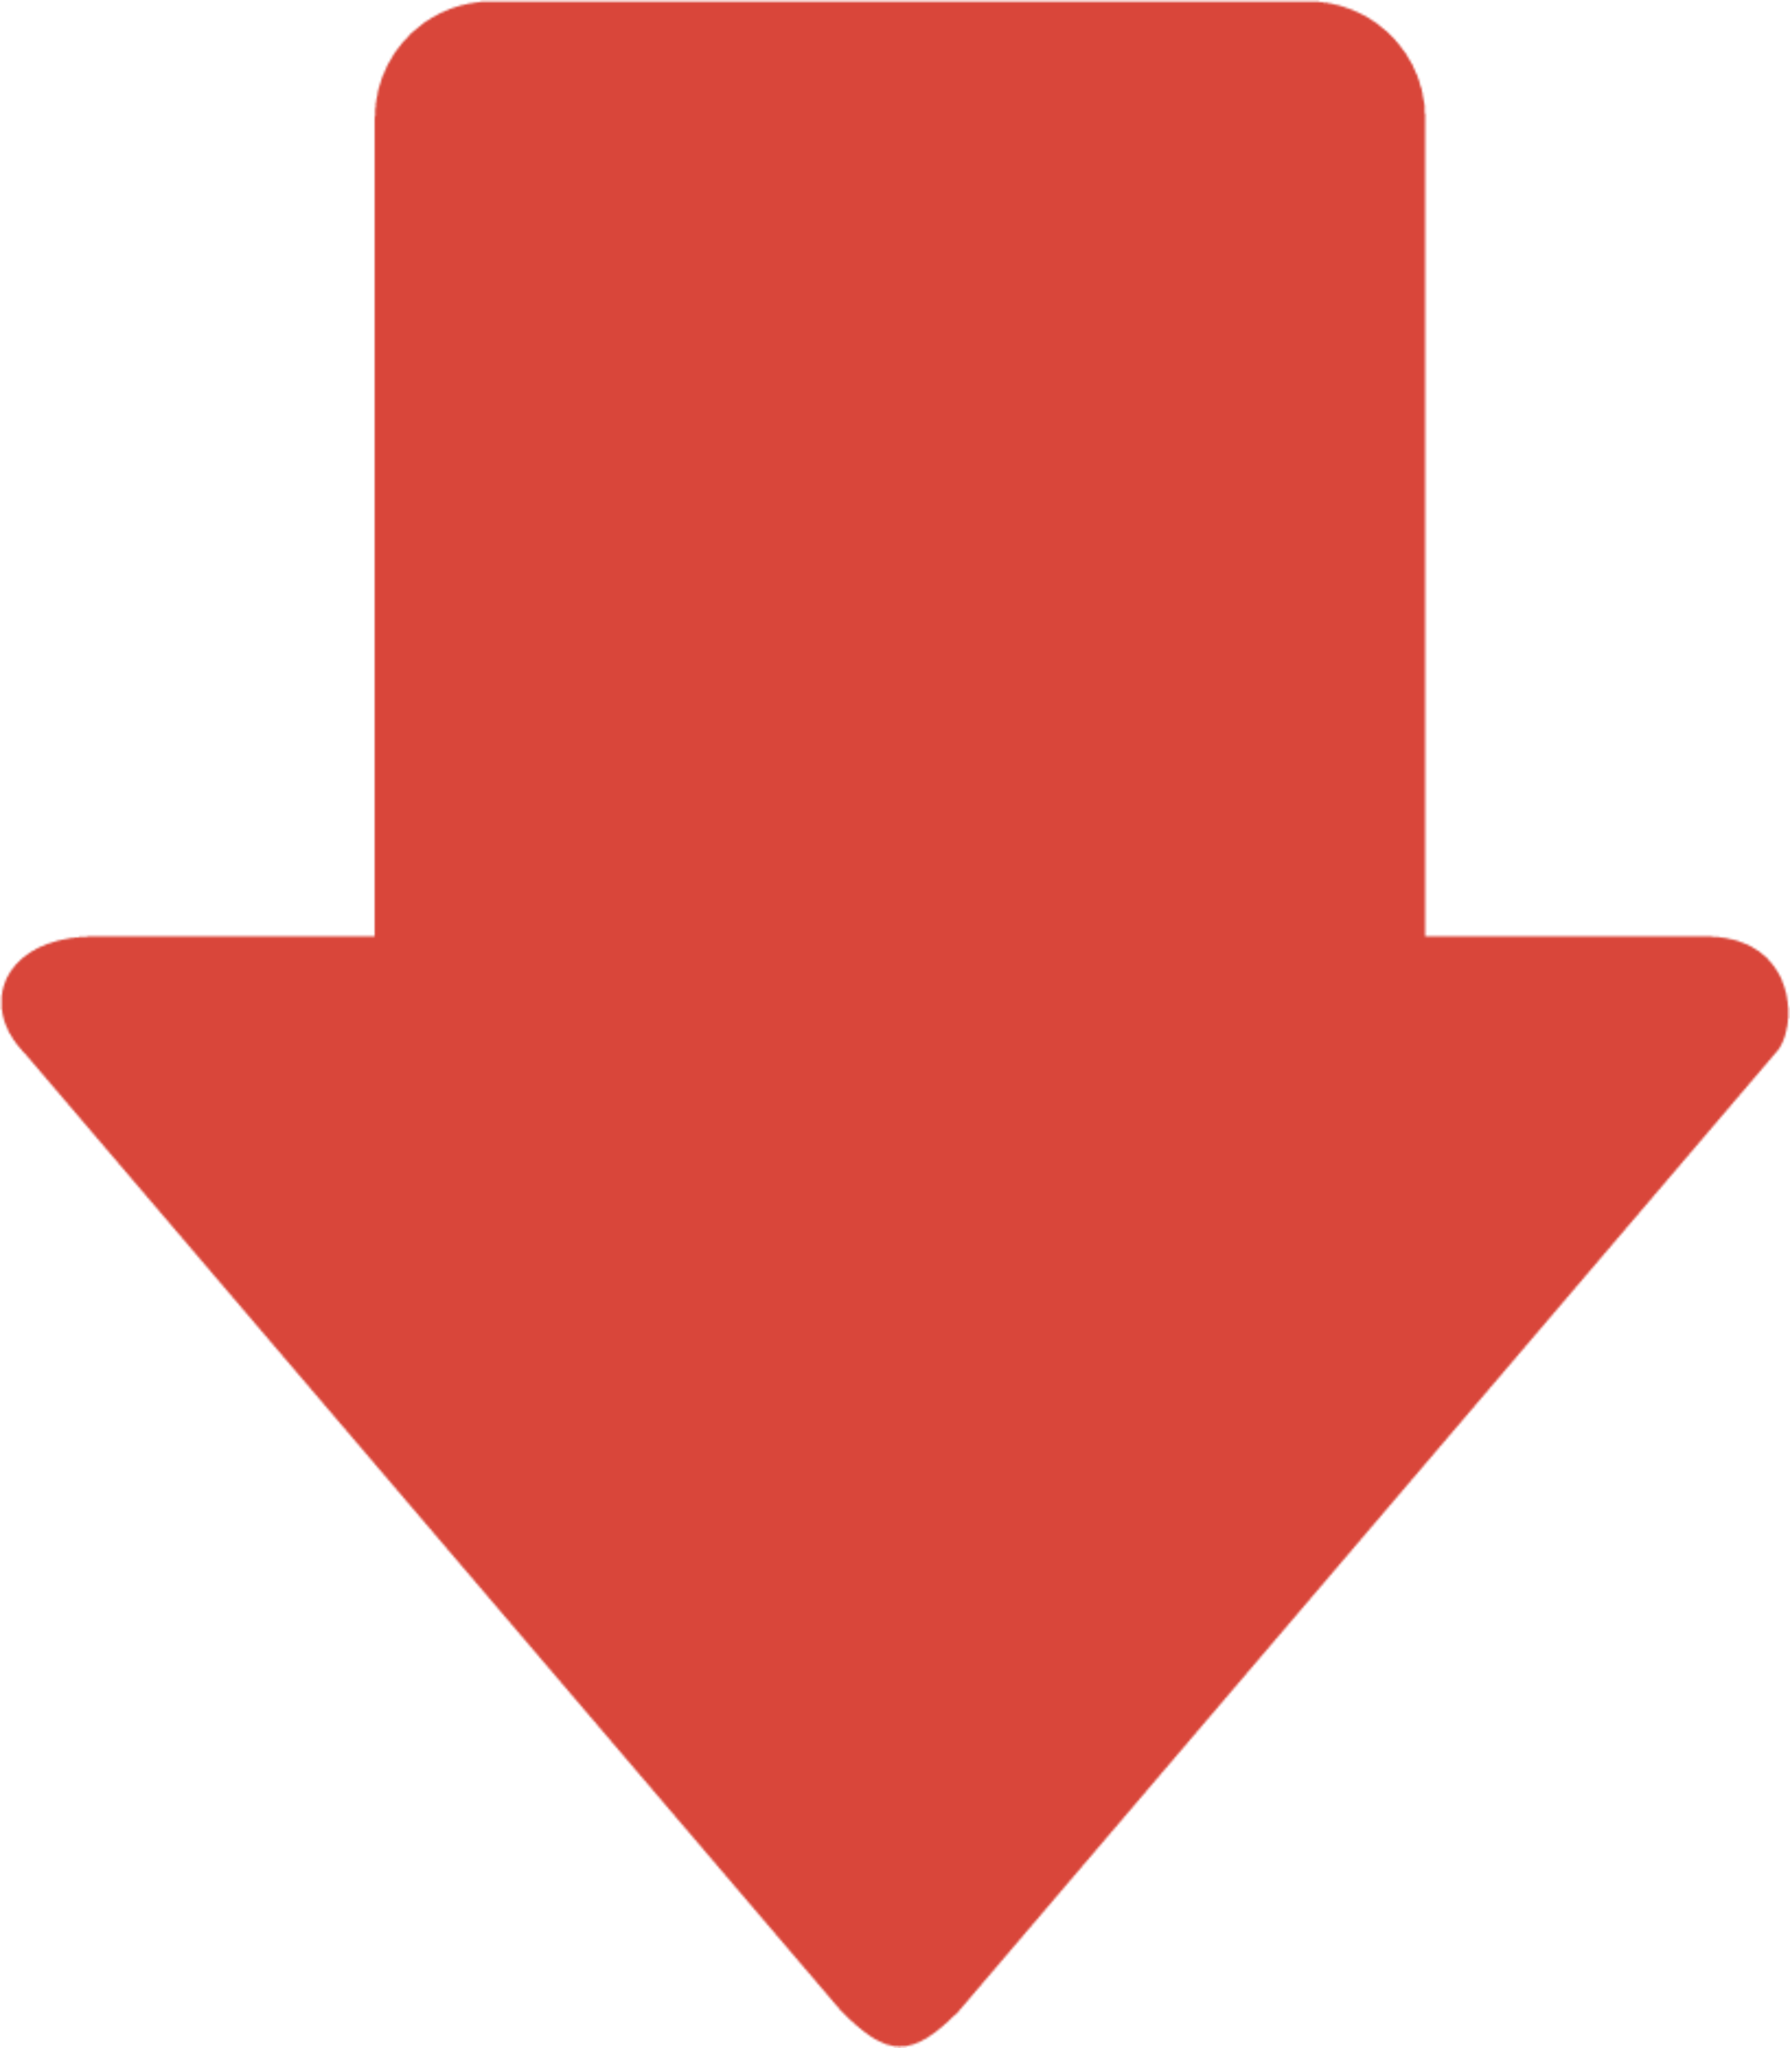 down red icon